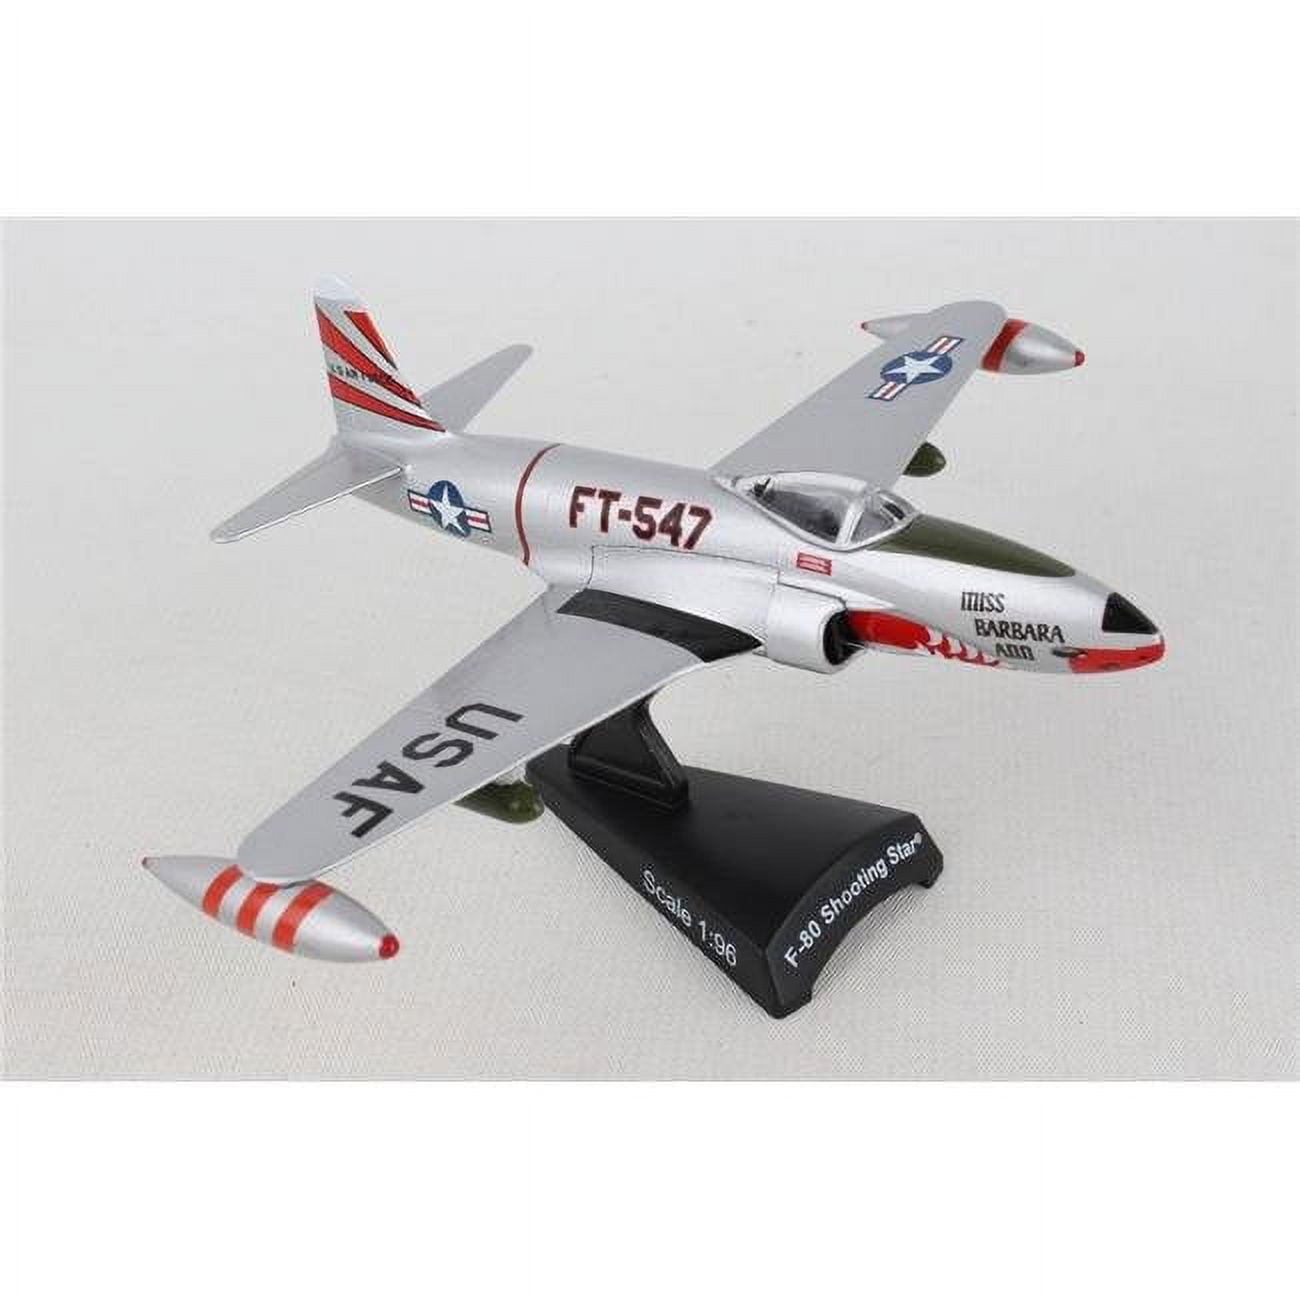 Picture of Postage Stamp Planes PS5392-1 1 by 96 Scale F80 Shooting Star Model Plane